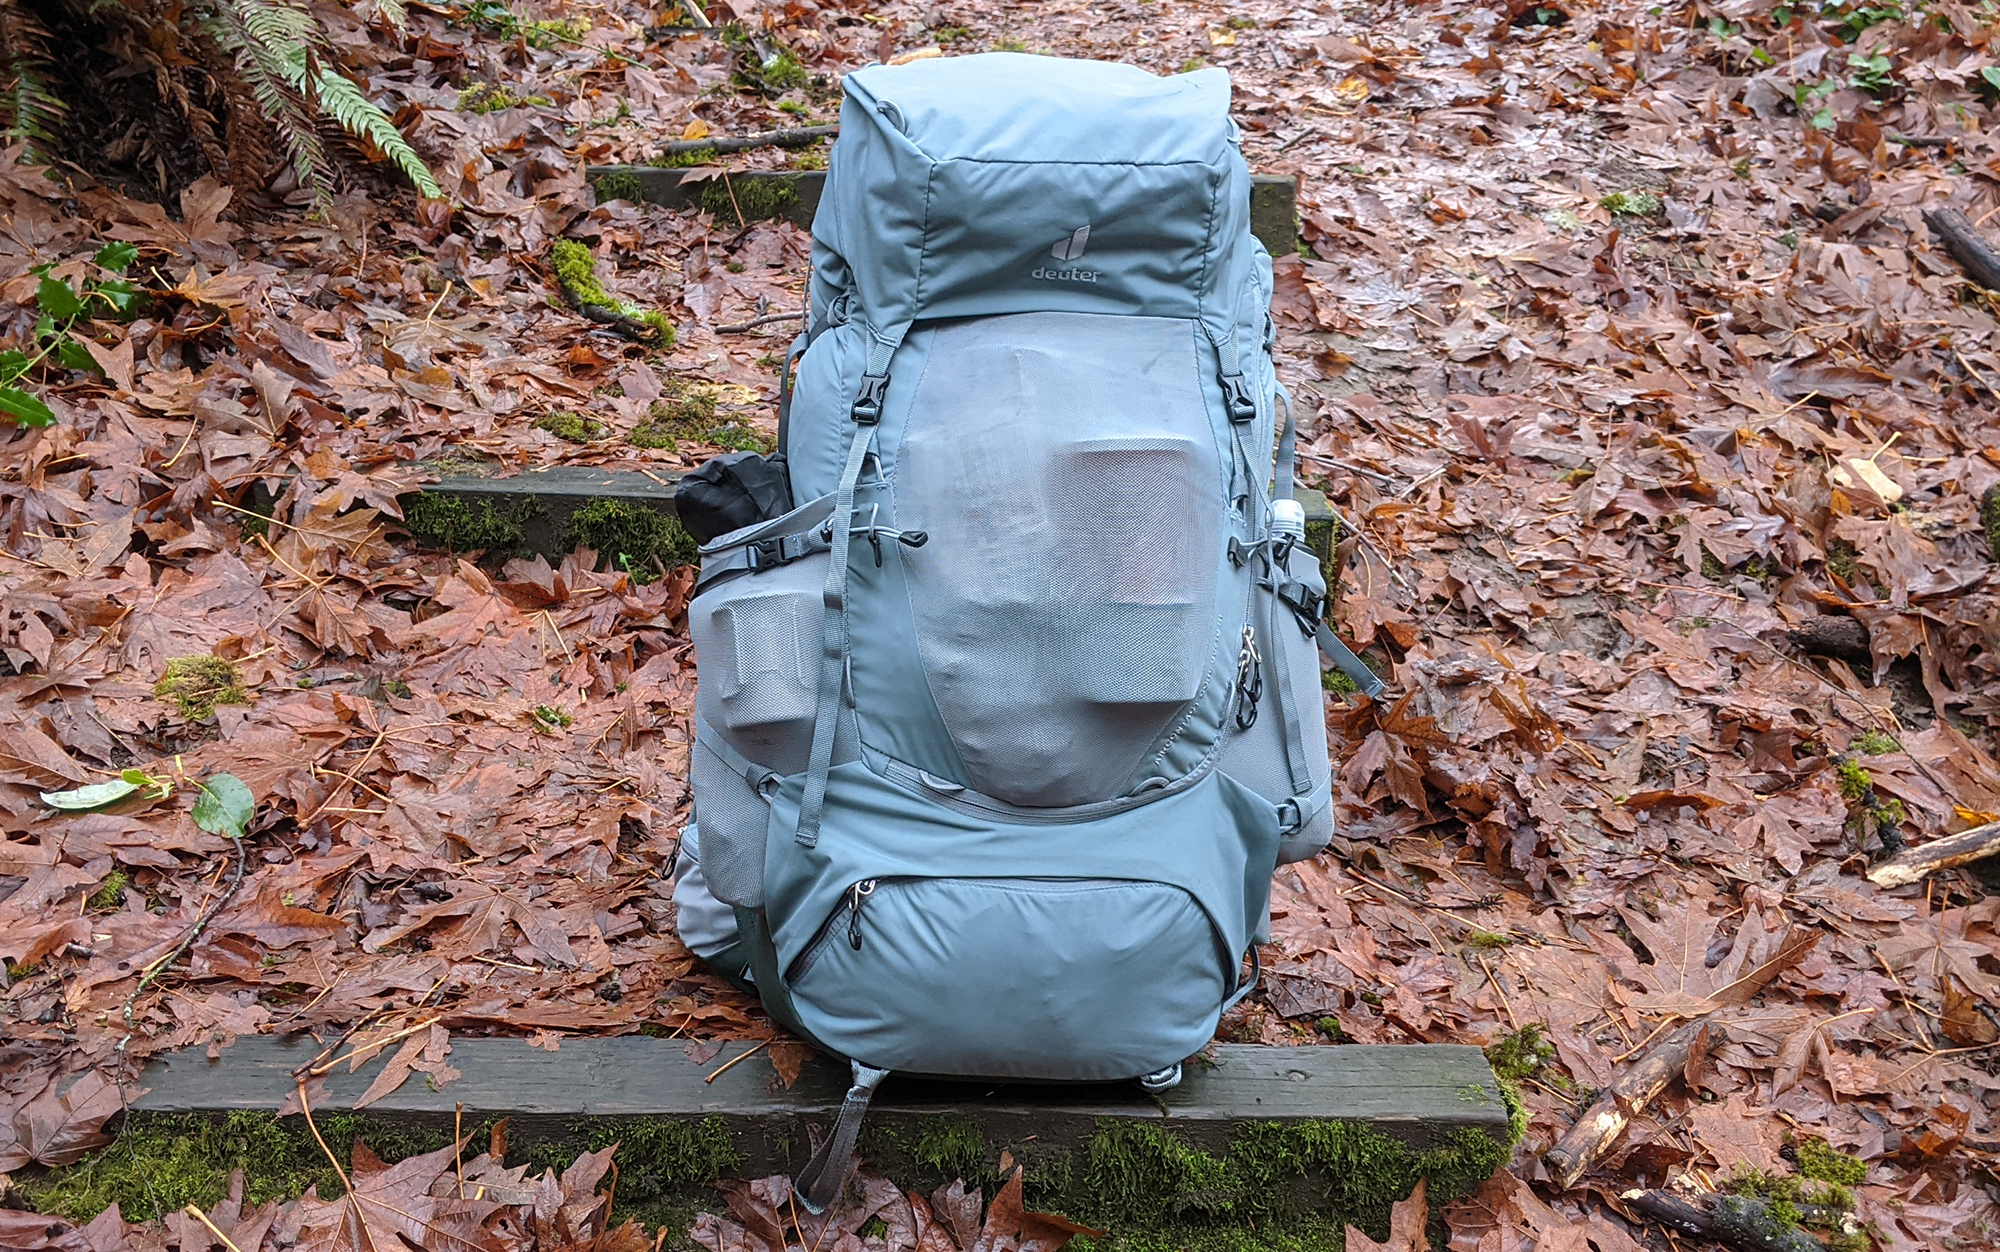 The Deuter Aircontact is a popular backpacking backpack.